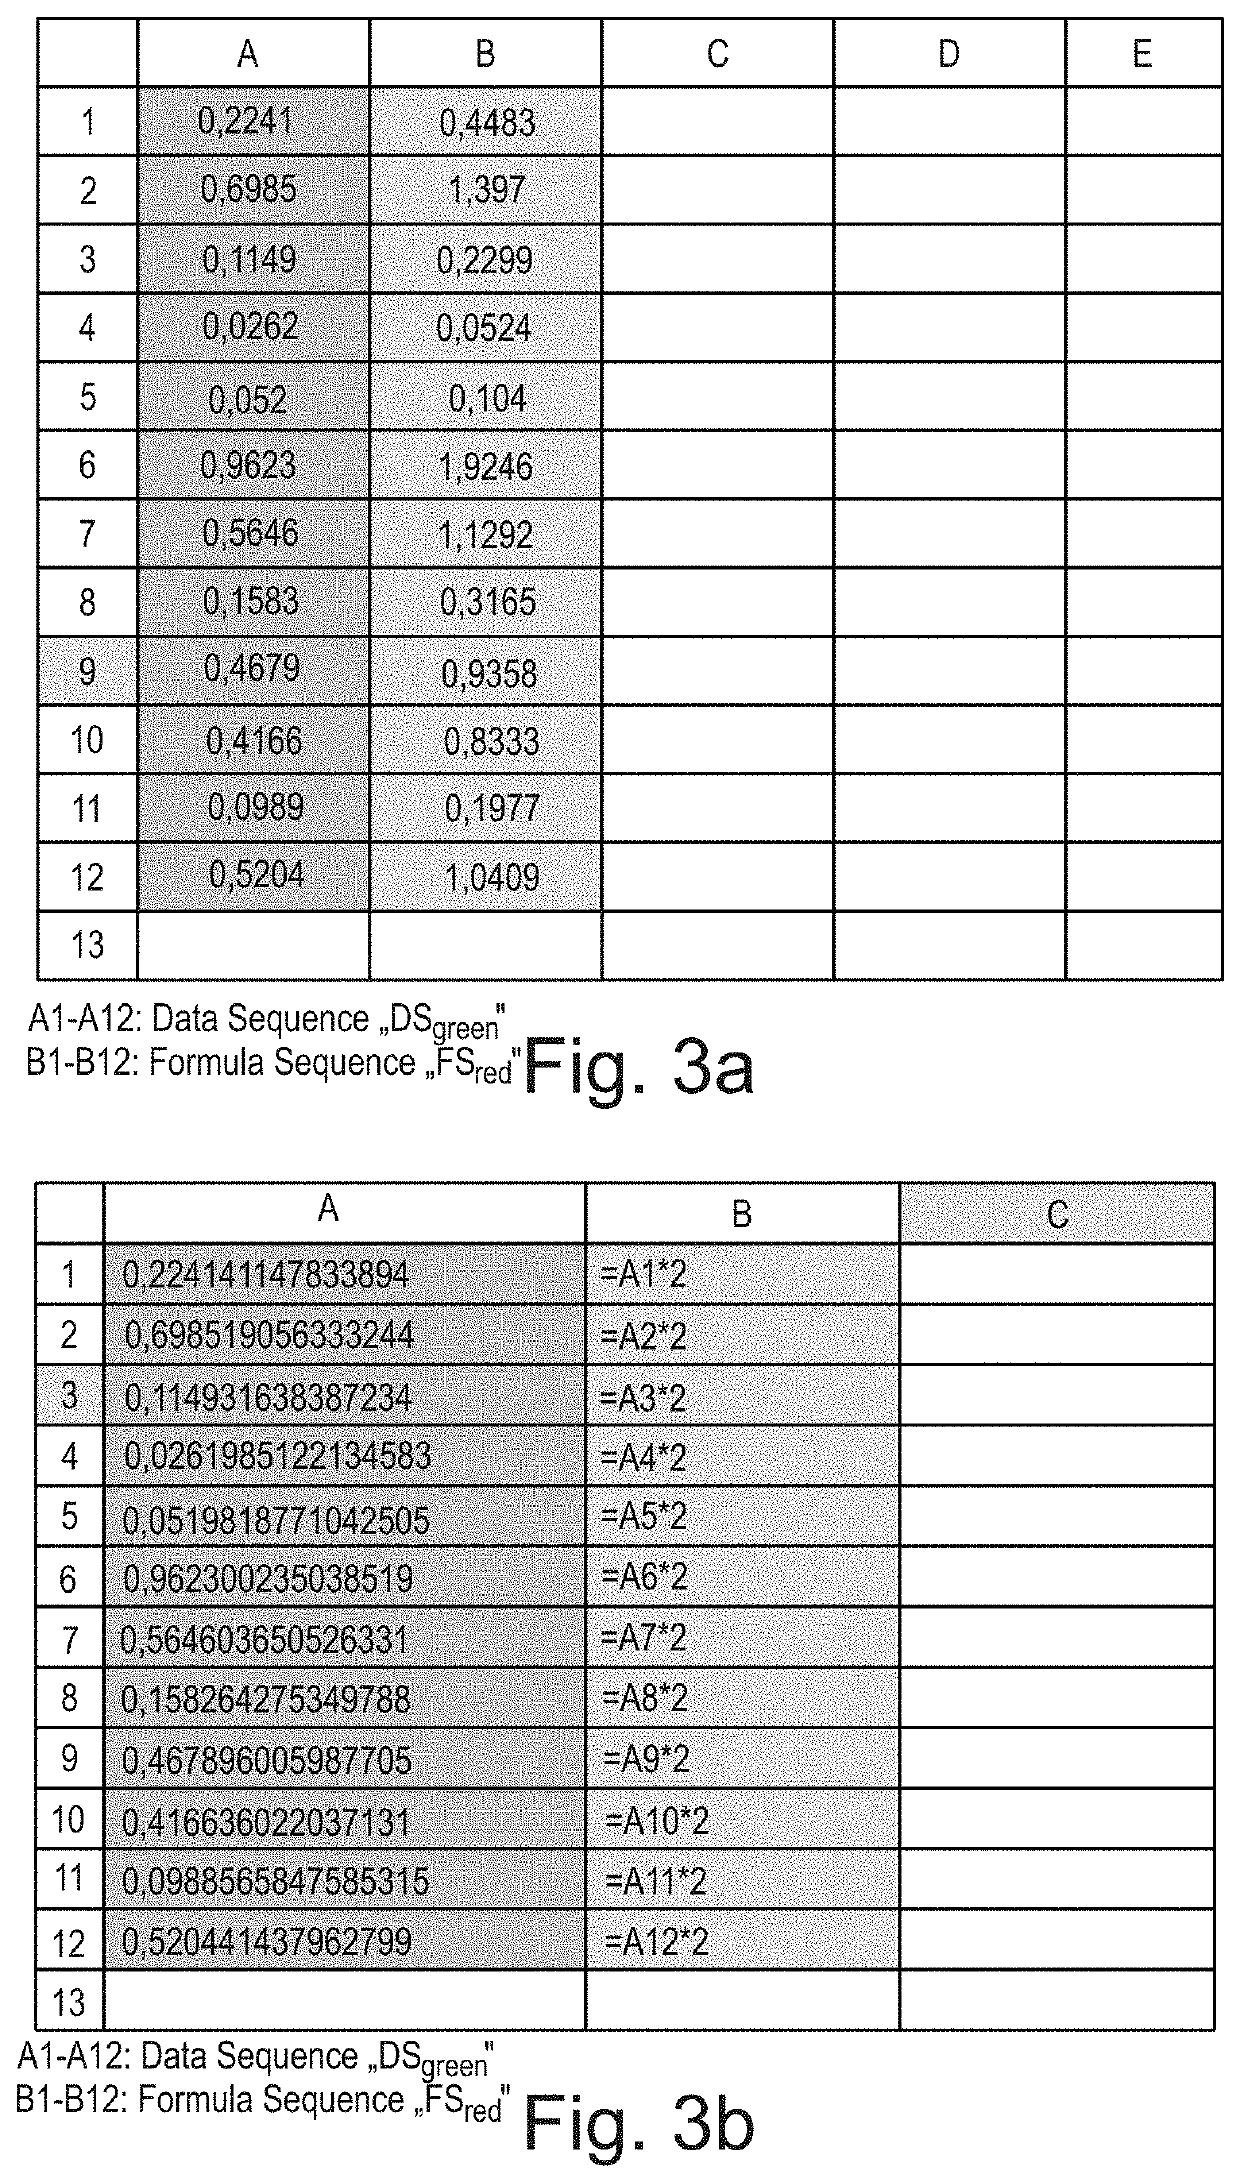 Pattern-based filling of a canvas with data and formula